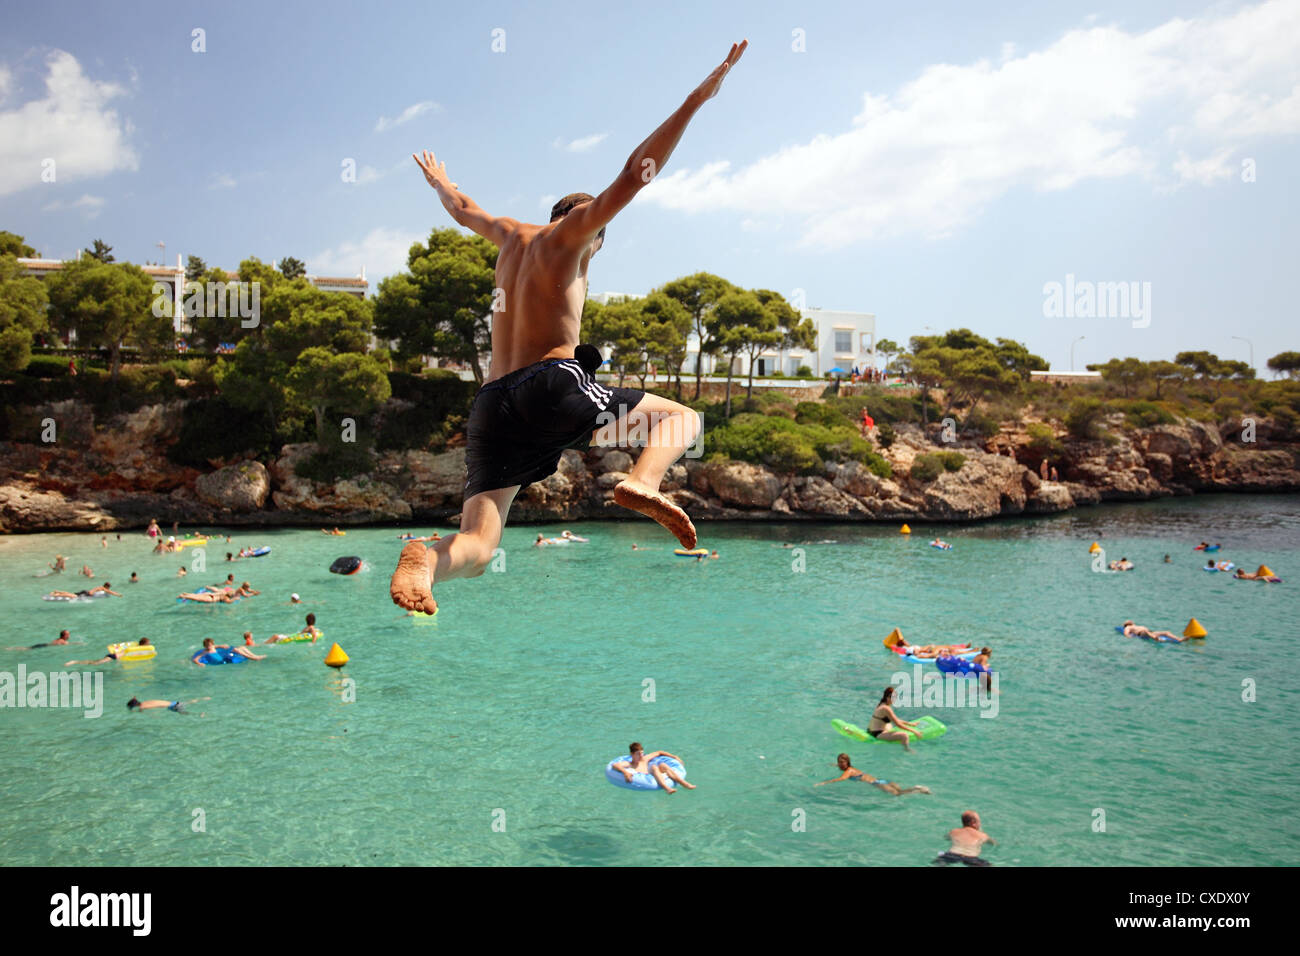 Cala D'Or, a boy jumps into the water Stock Photo